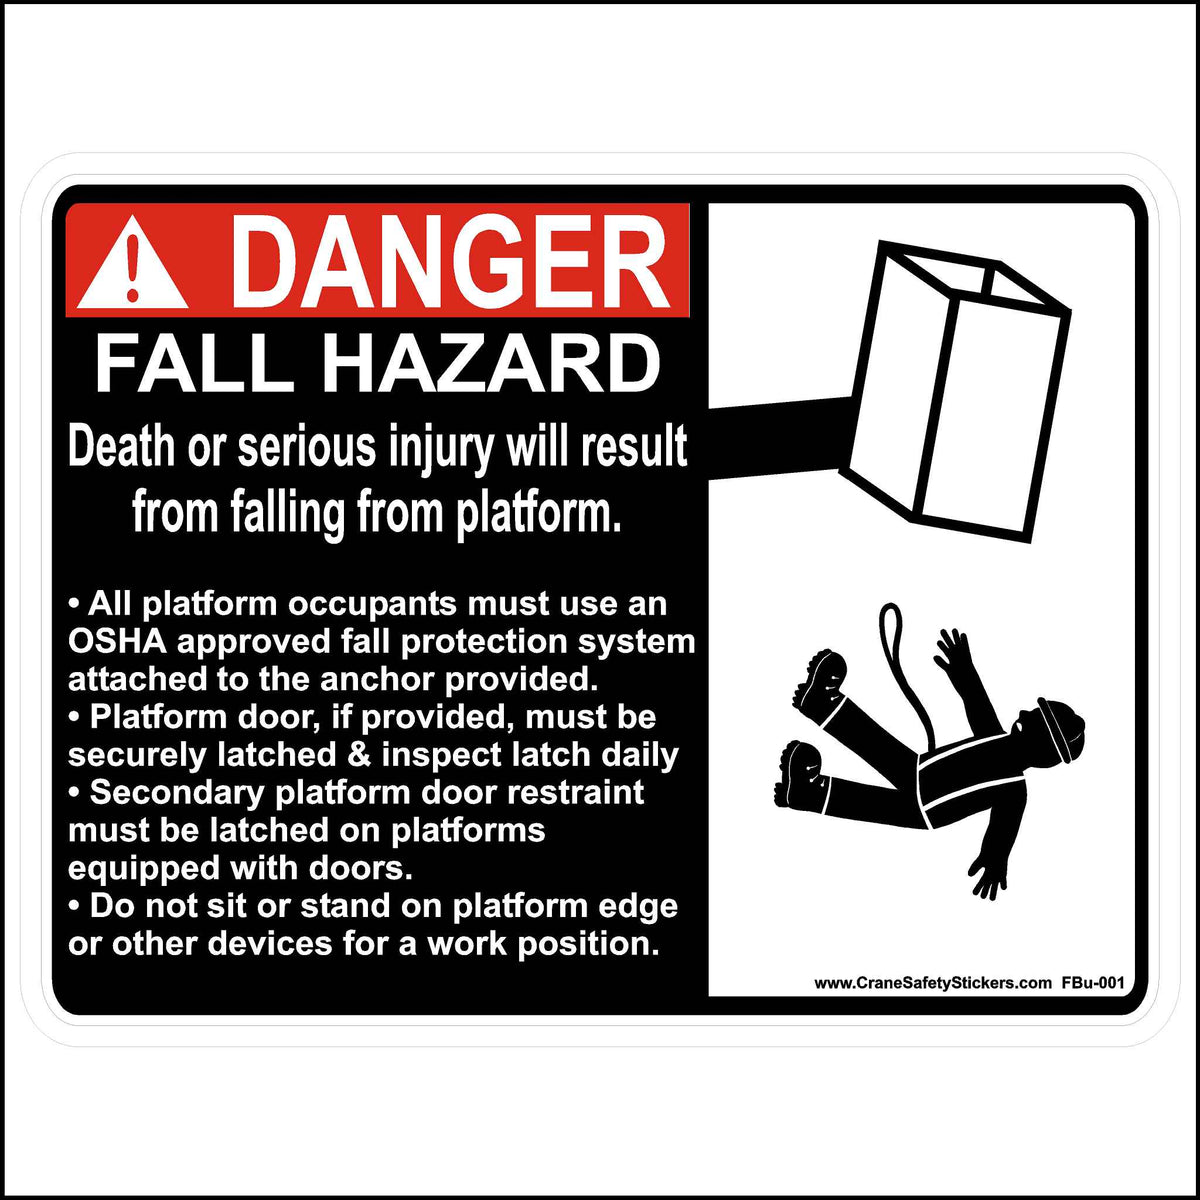 Bucket Truck Platform Warning Hazard Sticker Printed with, DANGER Fall Hazard, Death, Or Serious Injury Will Result From Falling From Platform.  • All platform occupants must use an OSHA approved fall protection system attached to the anchor provided. • Platform door, if provided, must be securely latched &amp; inspect latch daily • Secondary platform door restraints must be latched on platforms equipped with doors. • Do not sit or stand on platform edge or other devices for a work position.